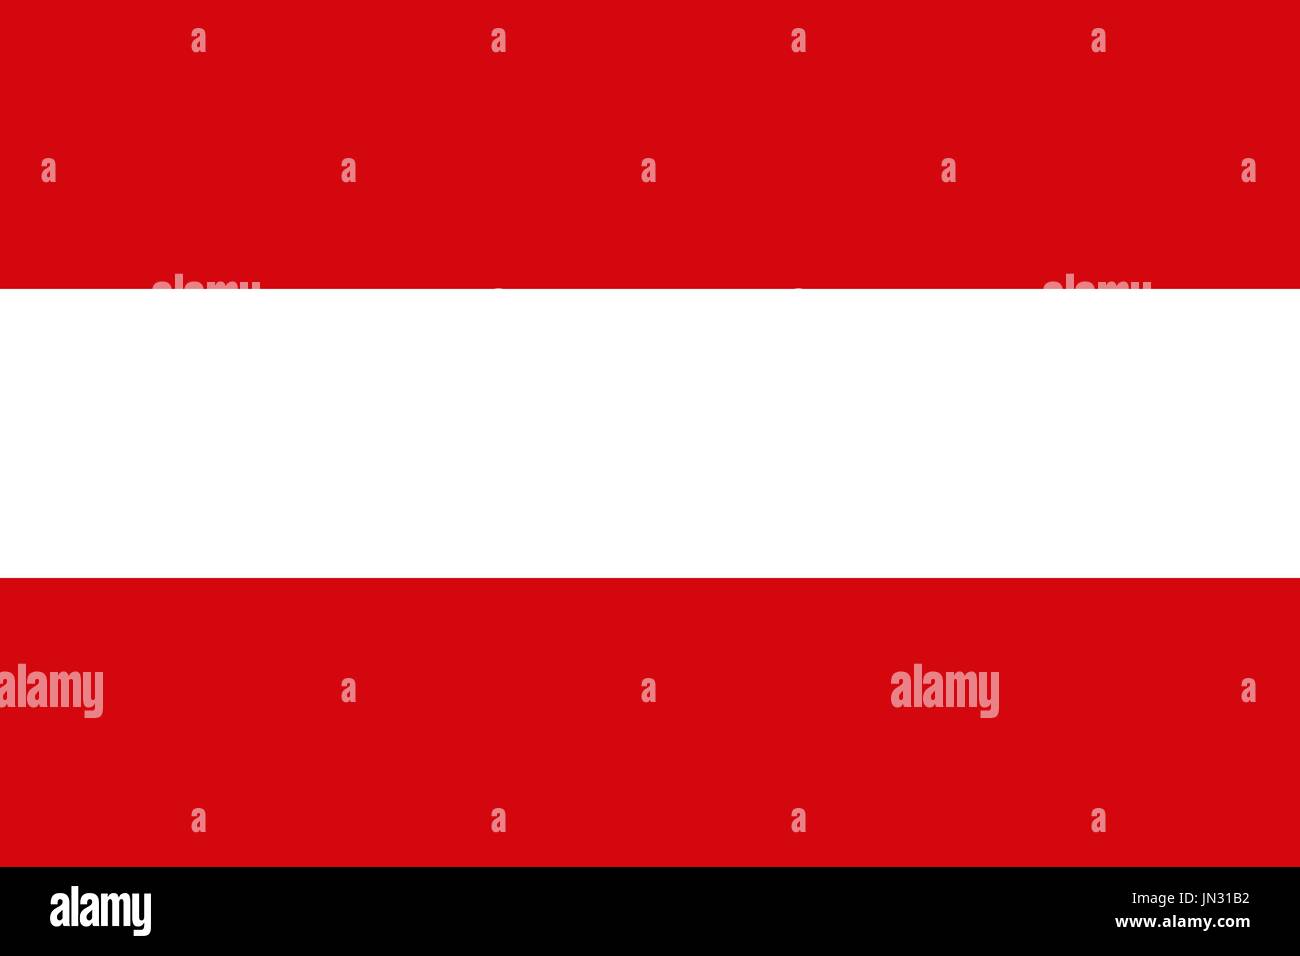 Flag design. Austrian flag on the white background, isolated flat layout for your designs. Vector illustration. Stock Vector